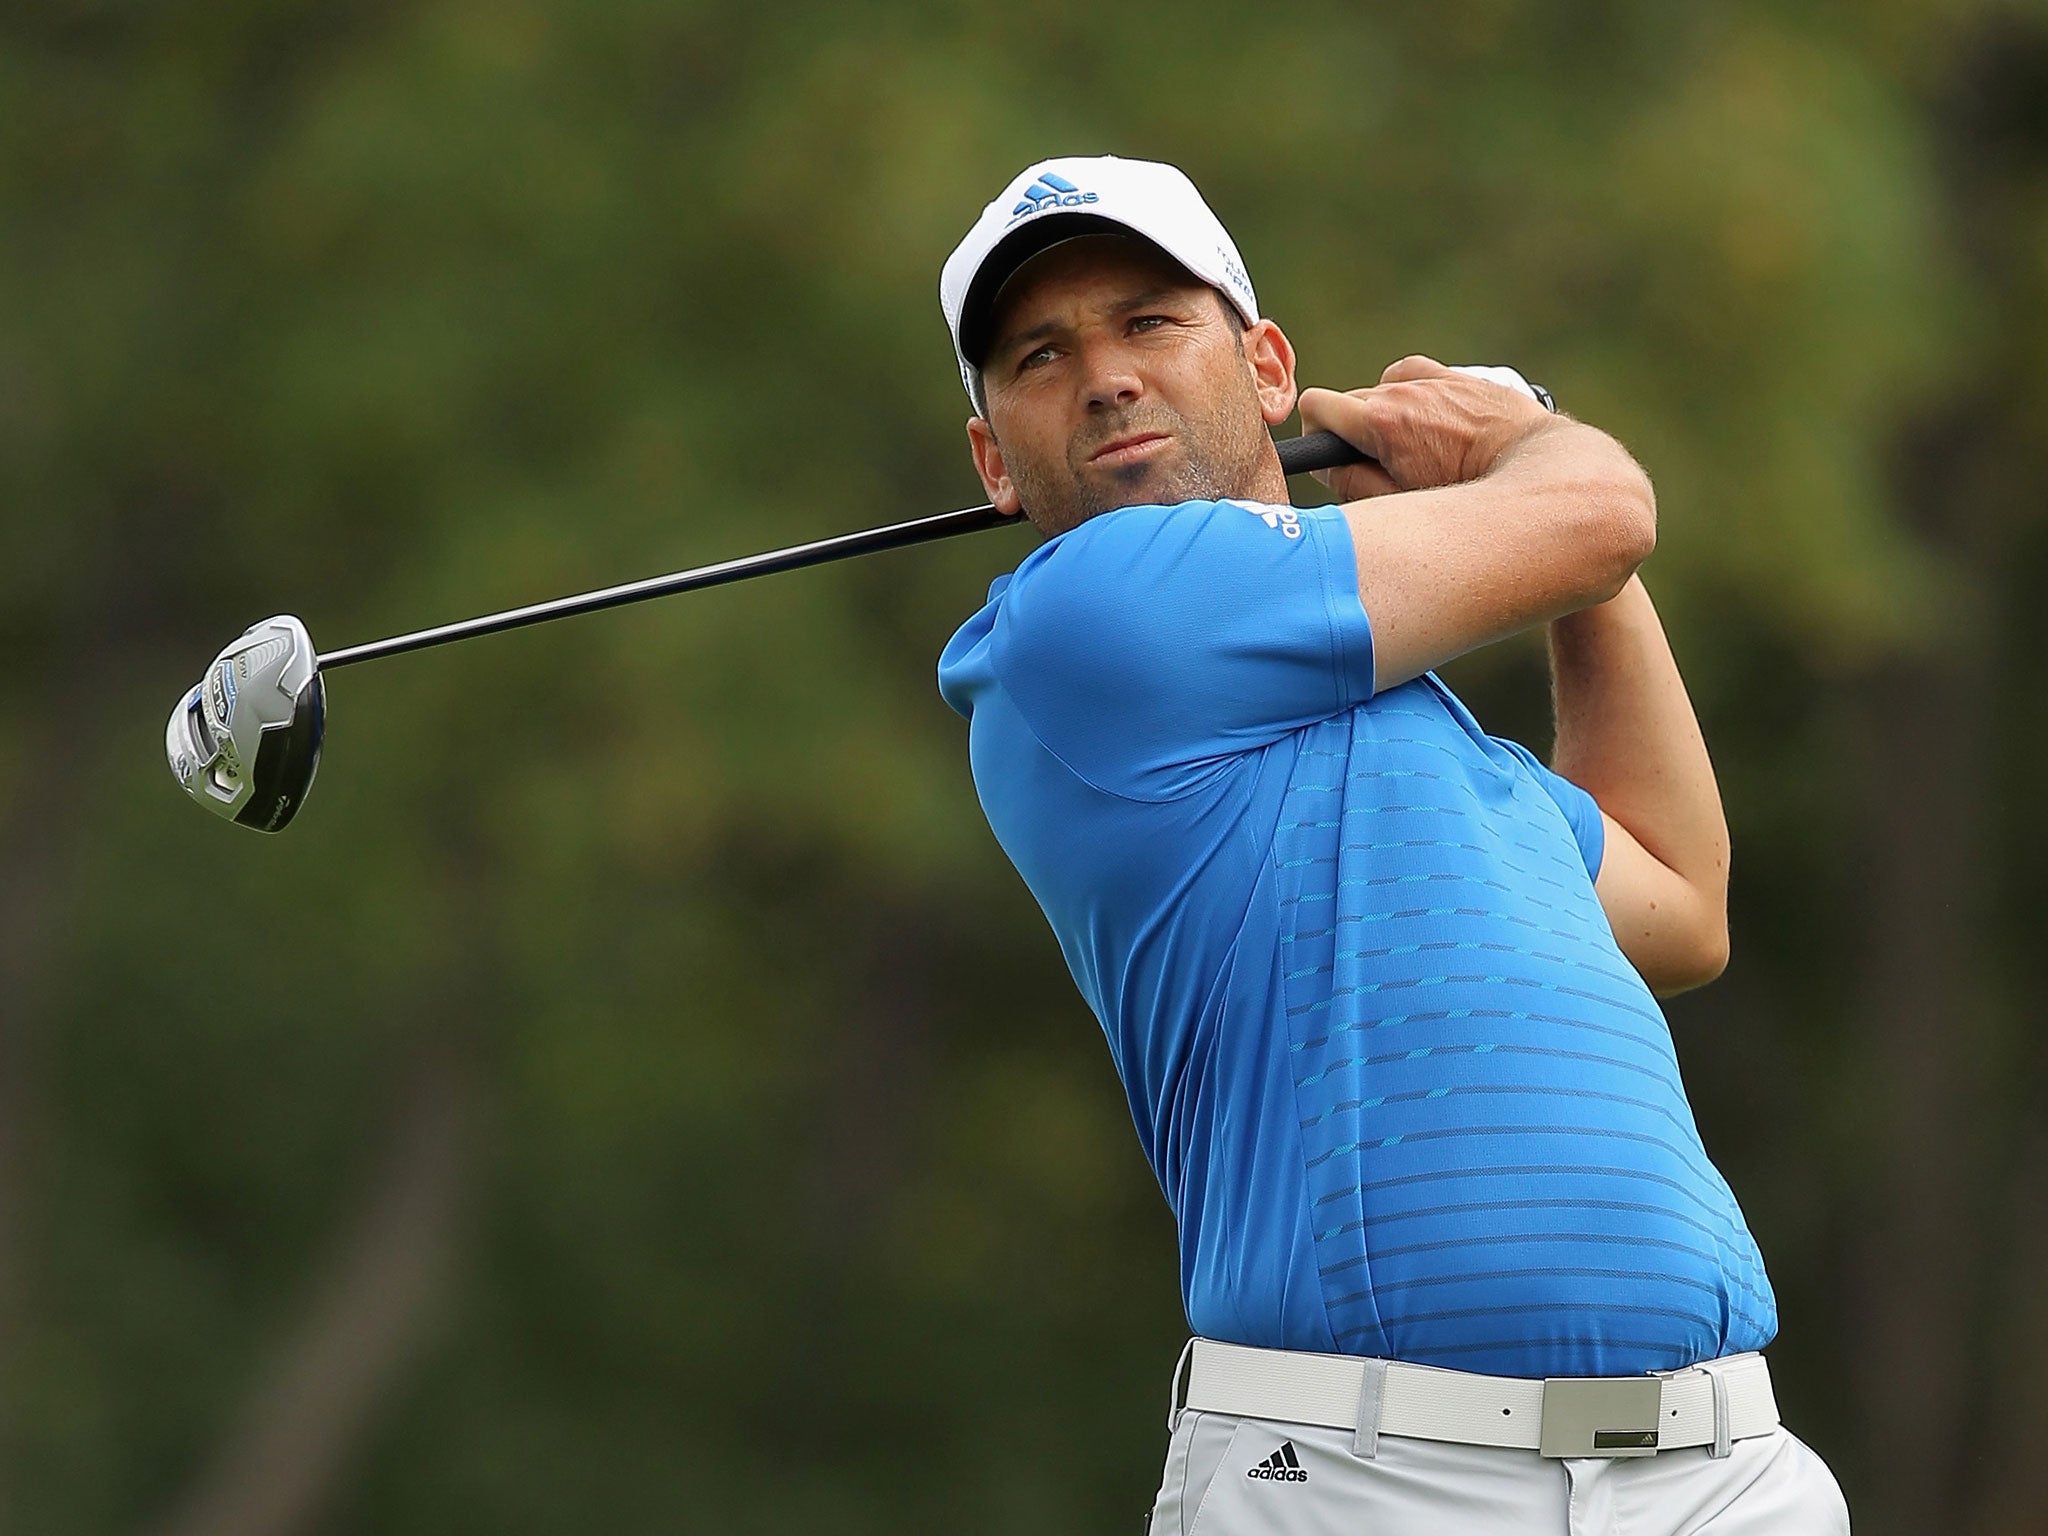 Sergio Garcia leads the BMW Championship after carding a 64 on Friday